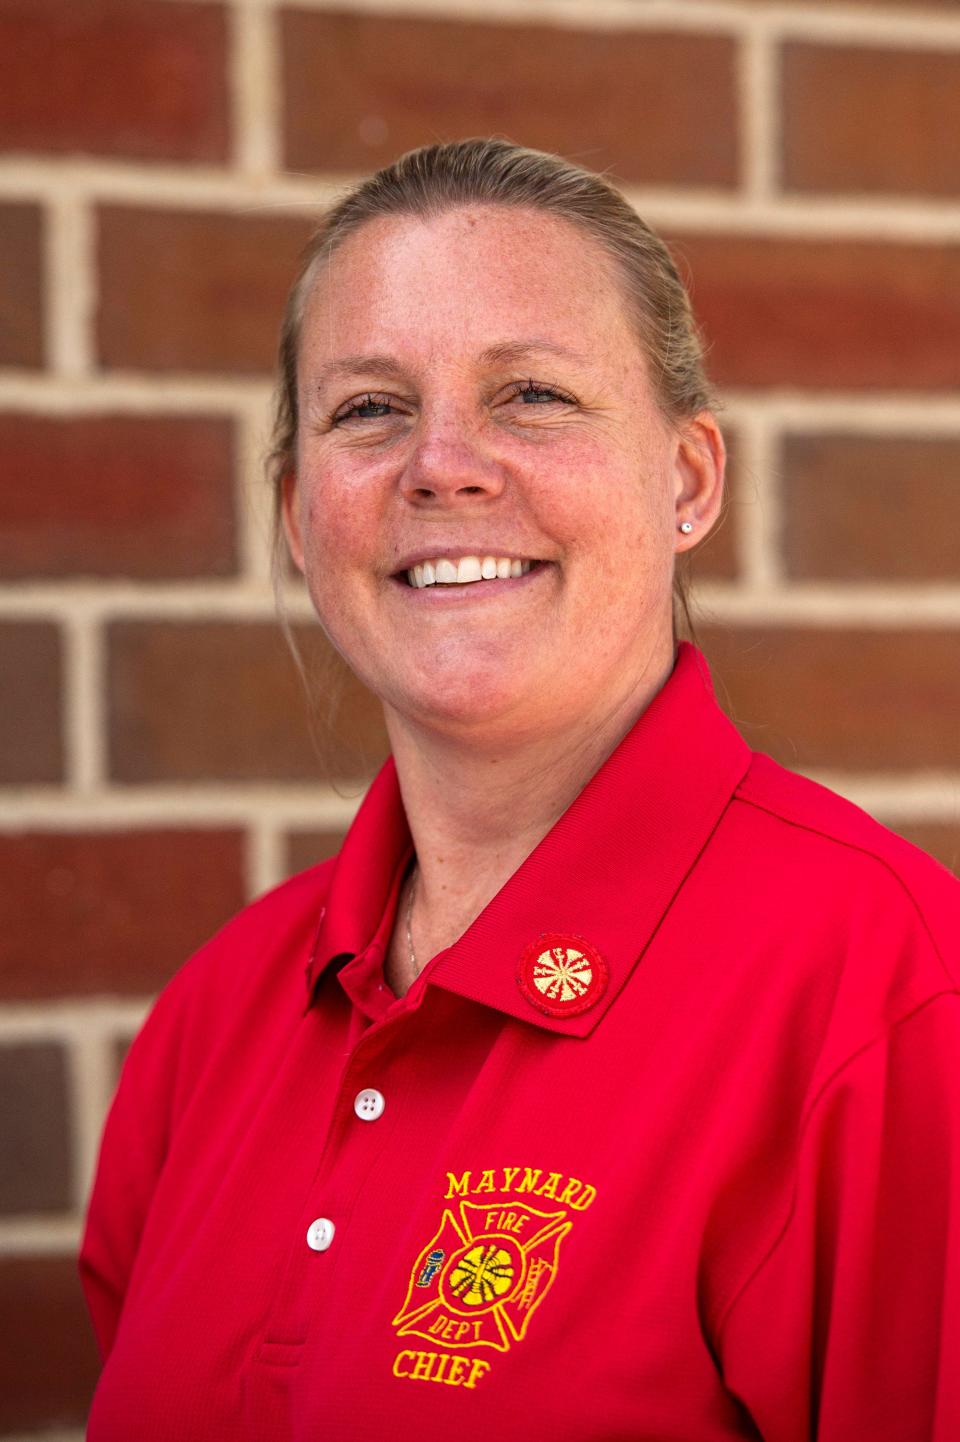 Maynard Fire Chief Angela Lawless got her start 20 years ago as a call firefighter in Holliston.